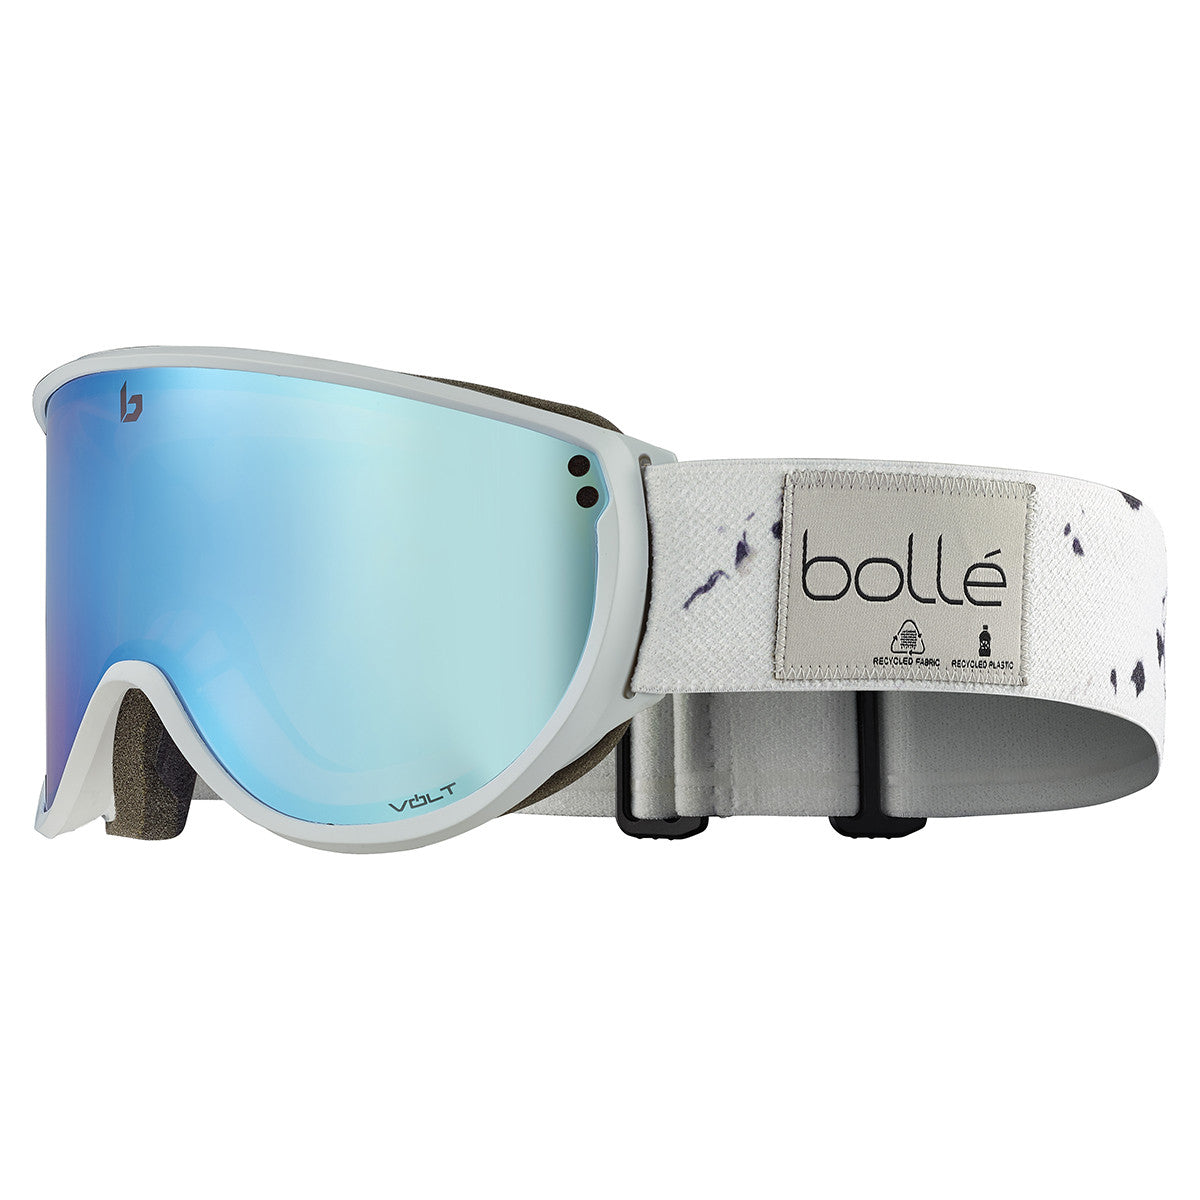 Bolle Eco Blanca Goggles  Ice White Matte Small One size